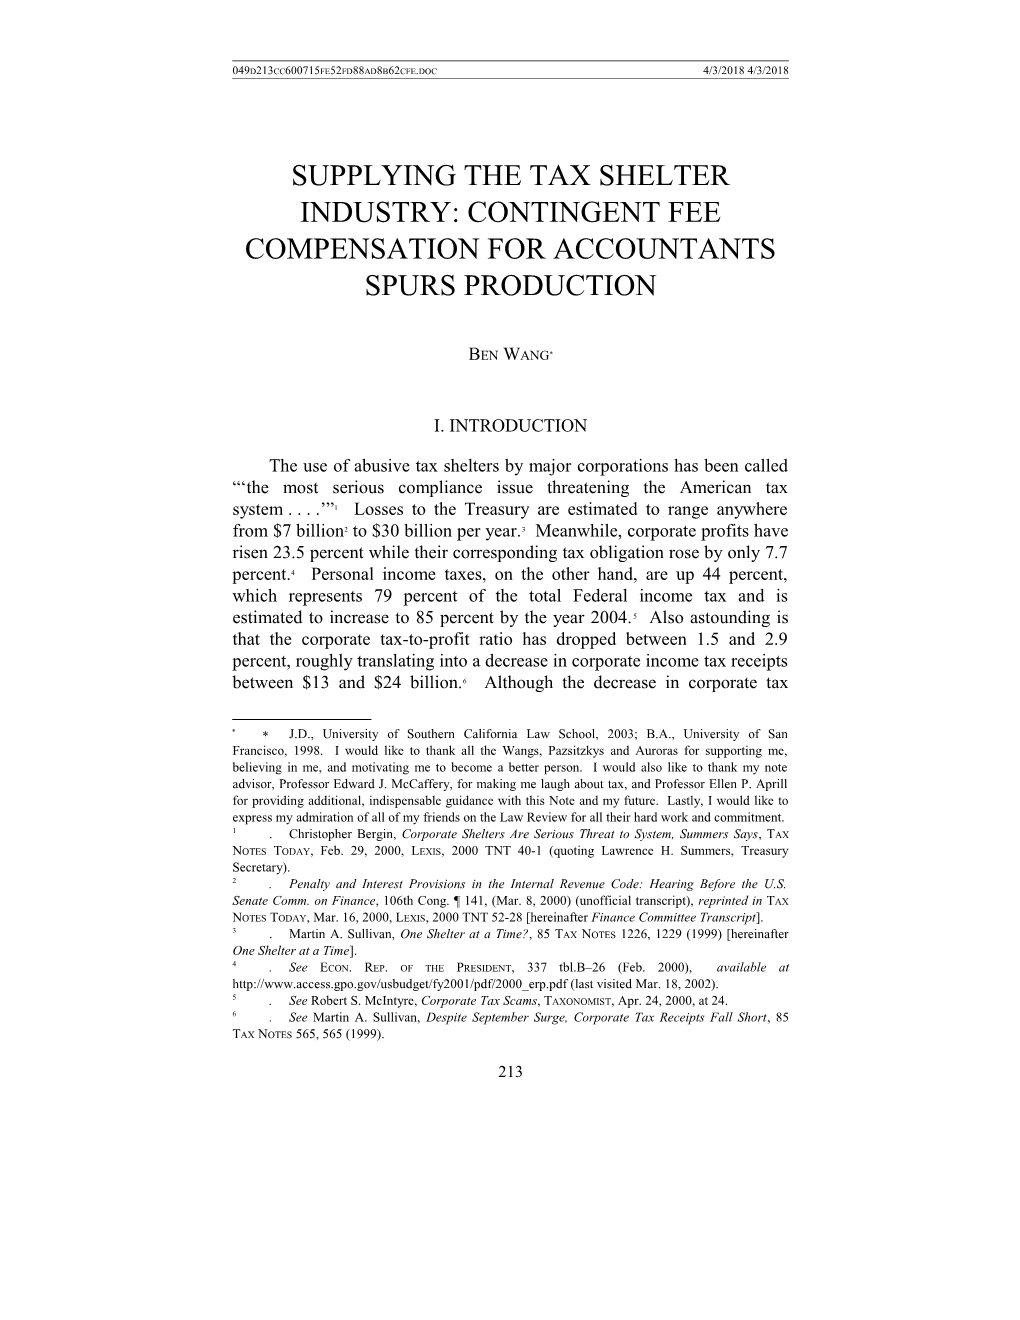 Supplying the Tax Shelter Industry: Accountant Compensation in the Form of Contingent Fees